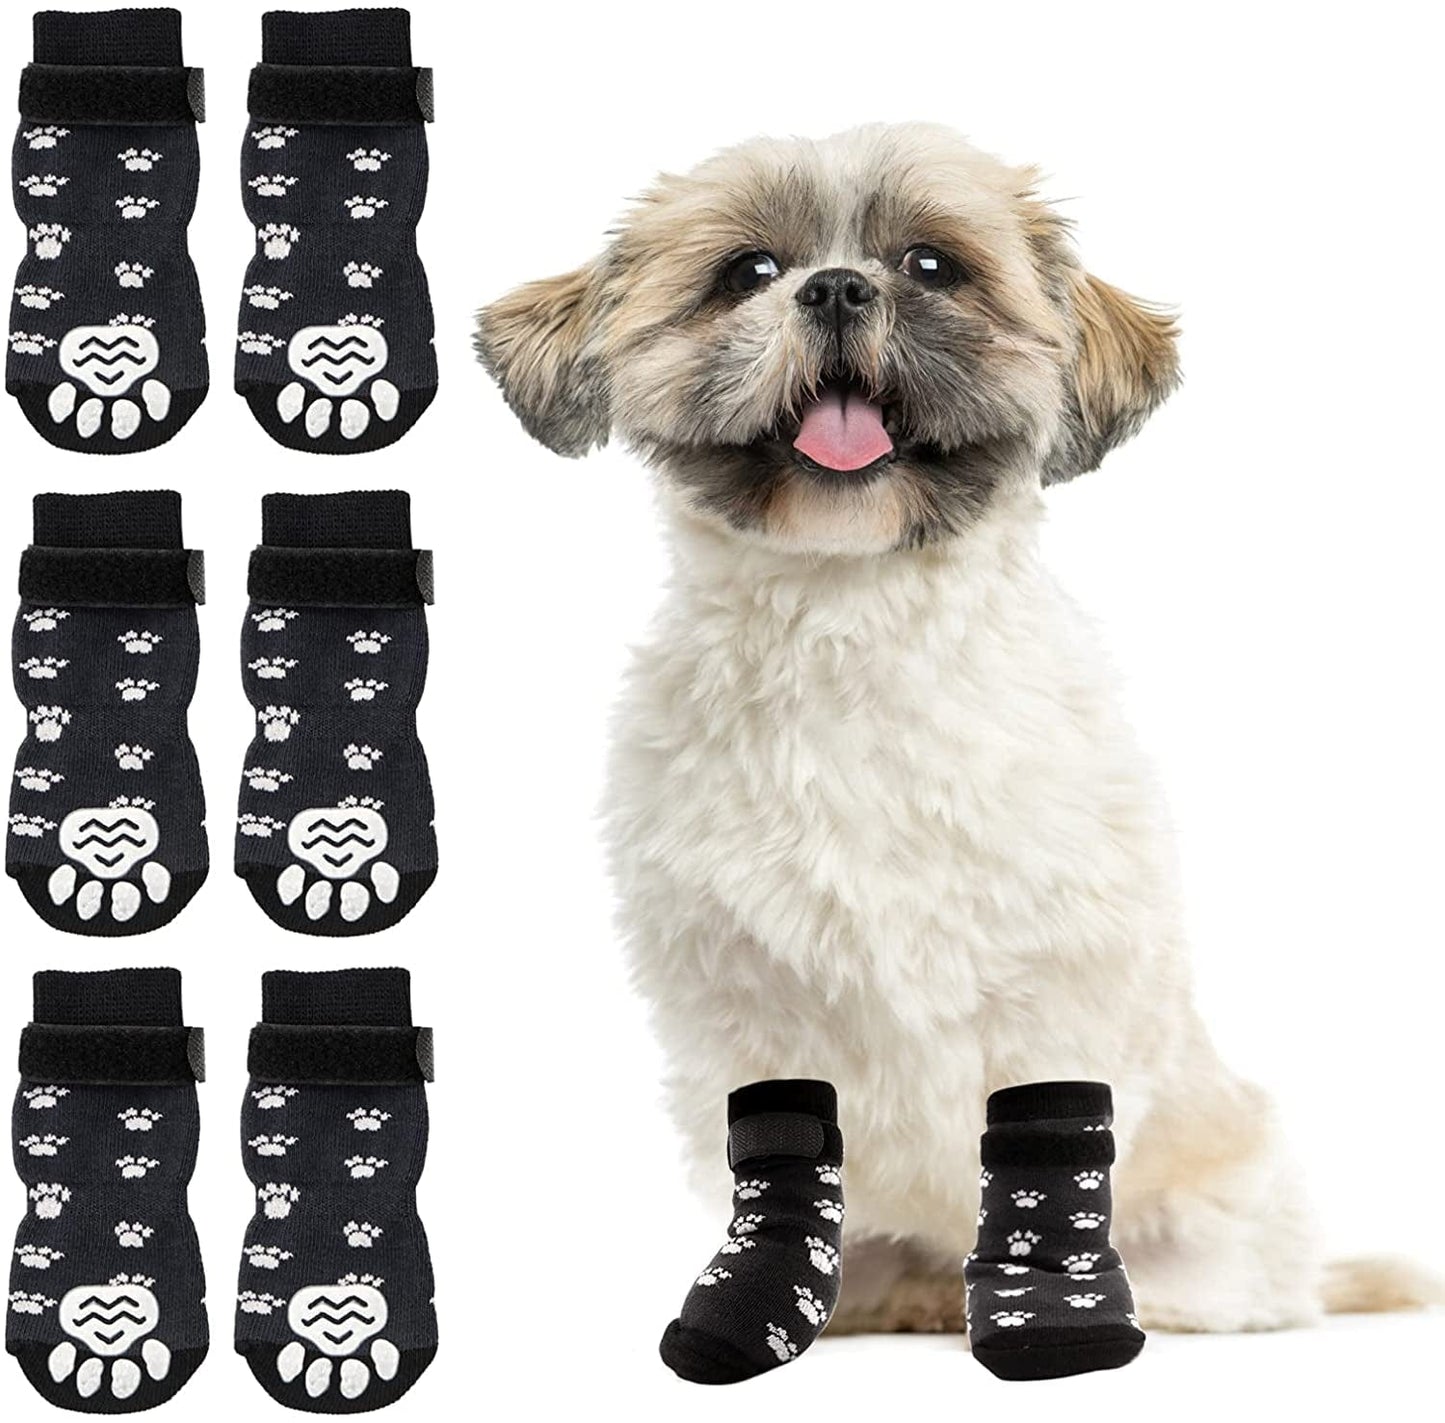 https://kol.pet/cdn/shop/products/rypet-anti-slip-dog-socks-3-pairs-dog-grip-socks-with-straps-traction-control-for-indoor-on-hardwood-floor-wear-pet-paw-protector-for-small-medium-large-dogs-l-40521668264209_1445x.jpg?v=1675548720